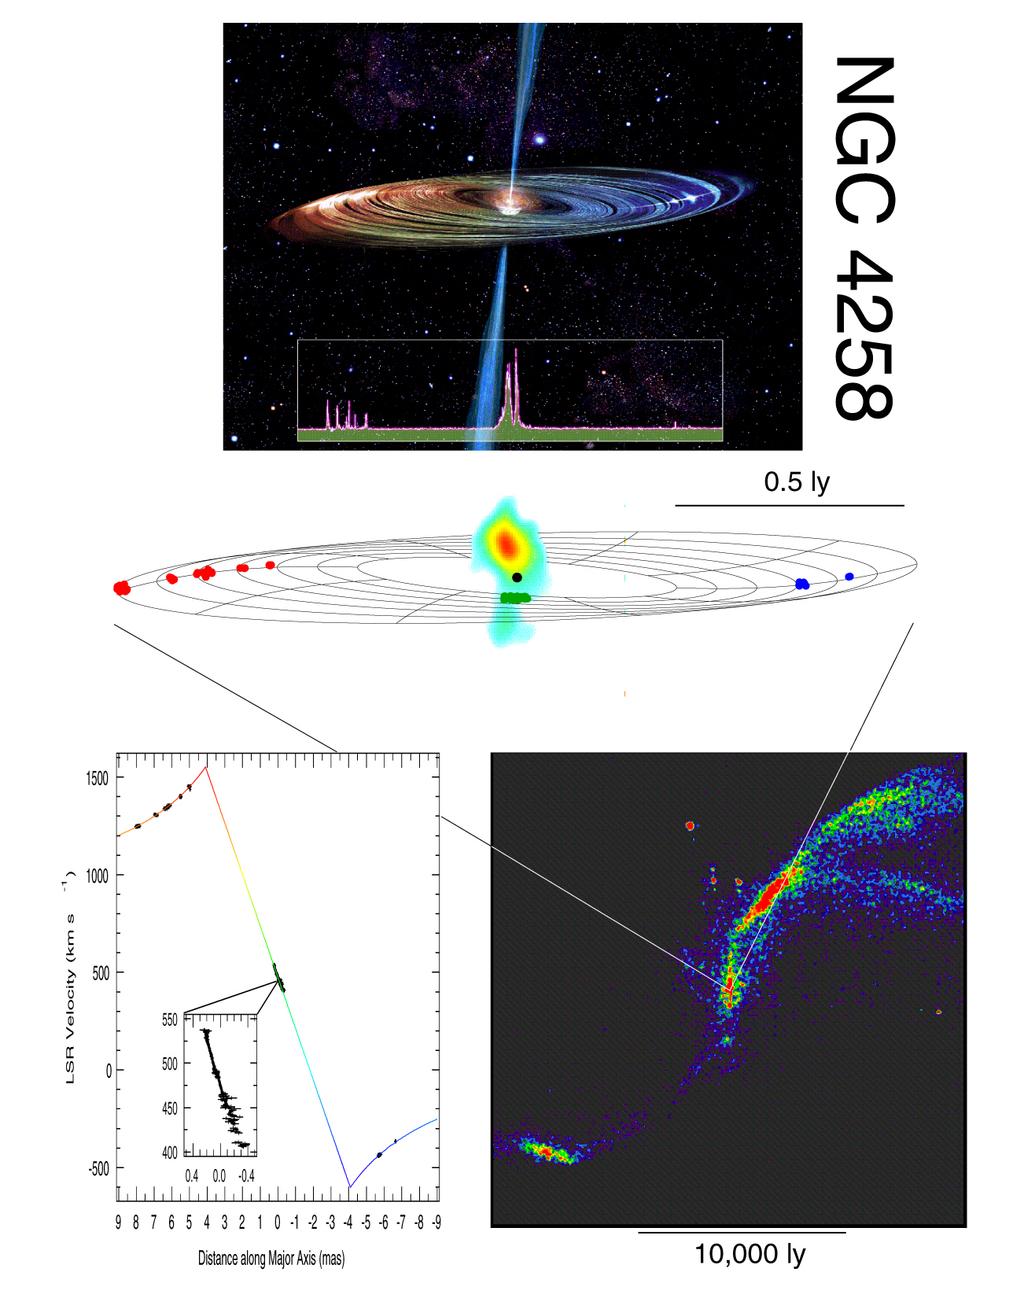 Can estimate distance to host galaxy image courtesy